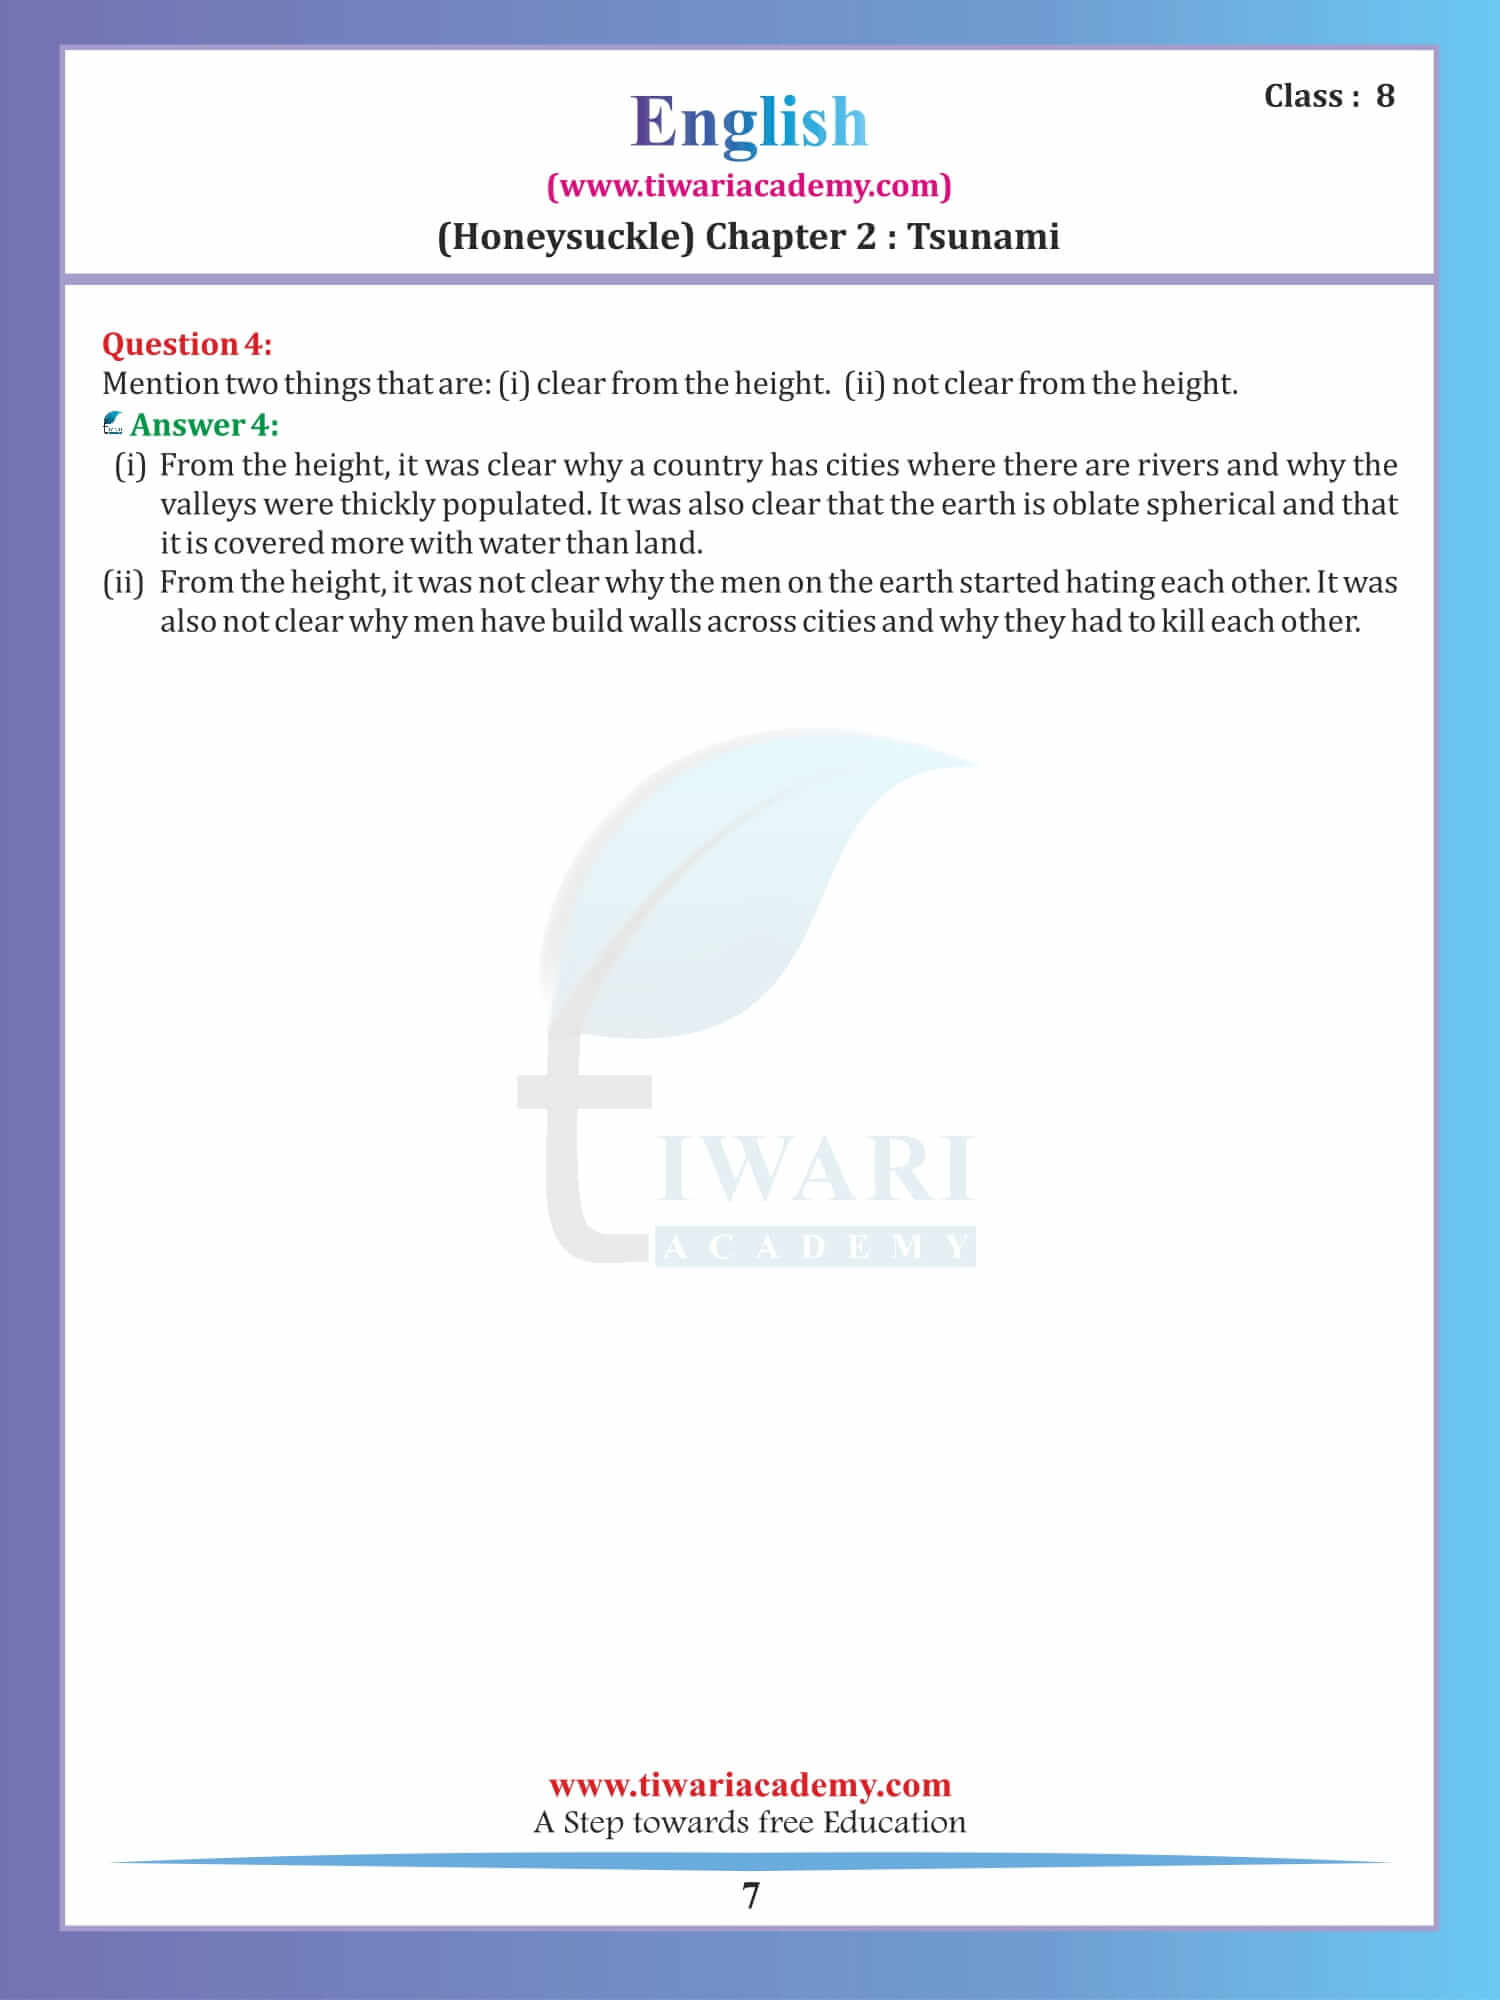 Class 8 English Honeydew Chapter 2 The Tsunami and the poem 2 free download